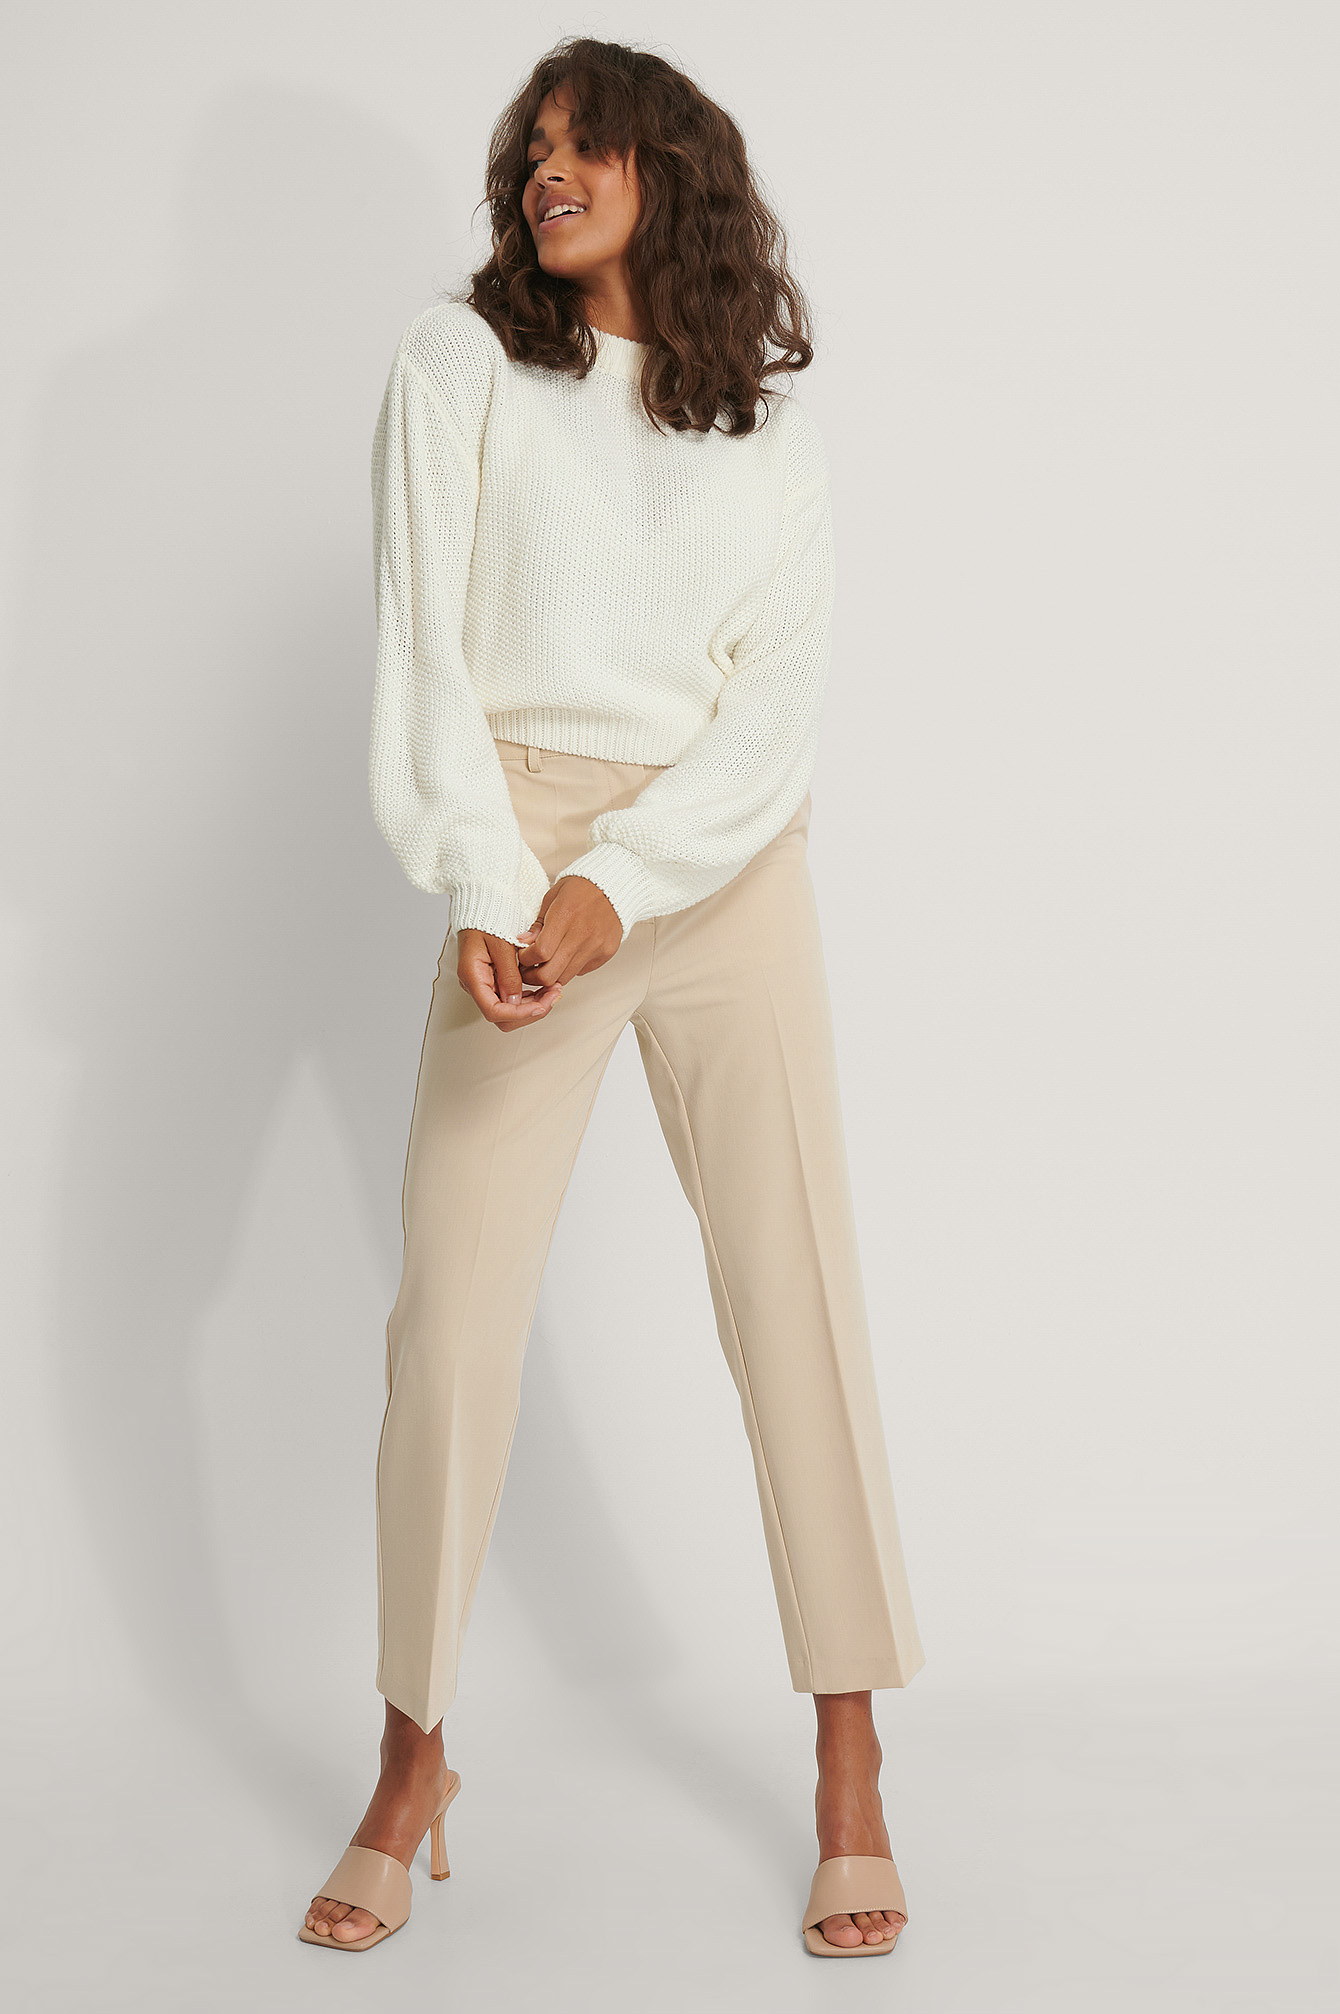 Balloon Sleeve Knitted Cropped Sweater with Beige Suit Pants.